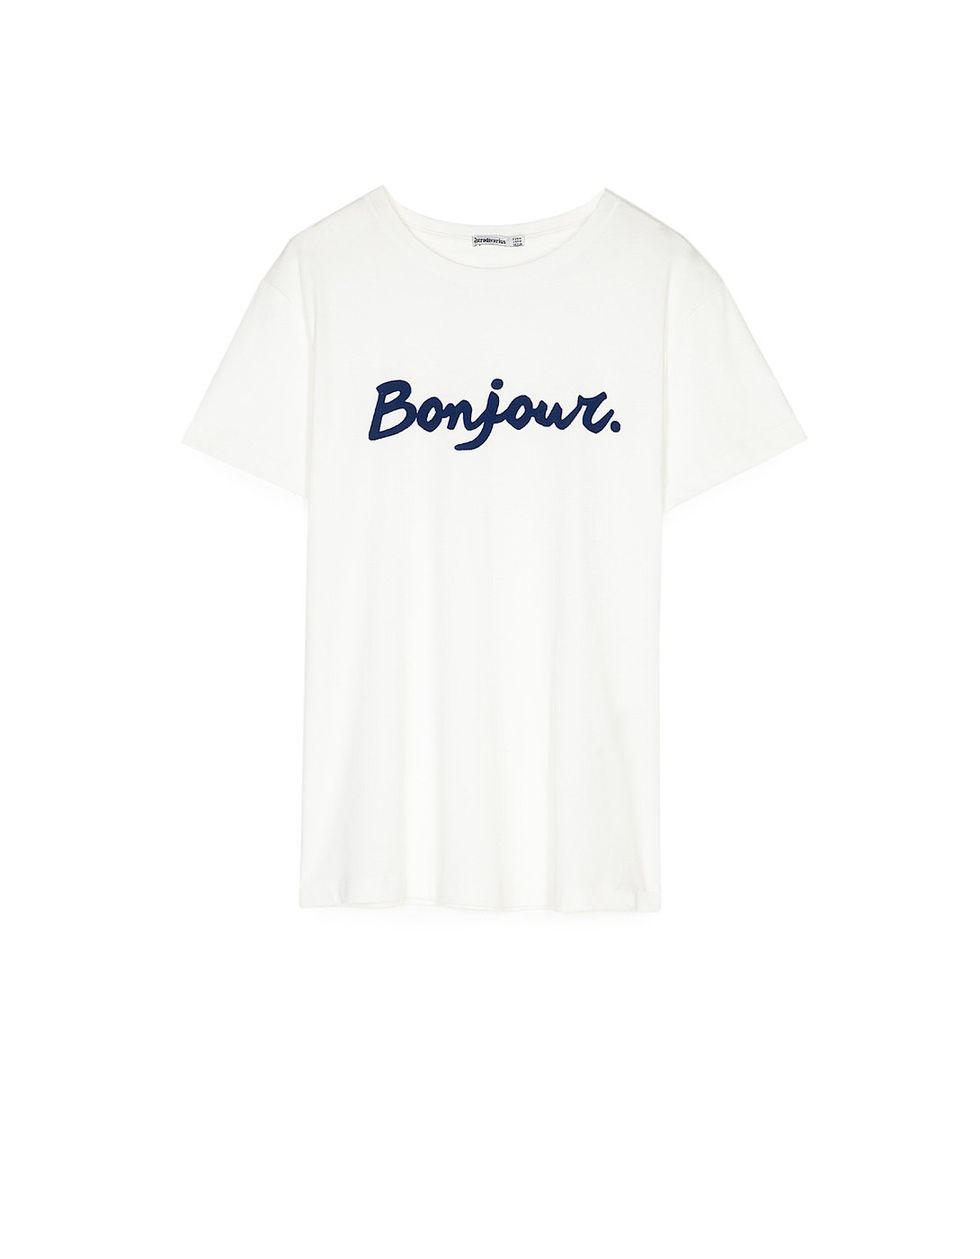 Clothing, T-shirt, White, Product, Text, Sleeve, Blue, Top, Active shirt, Font, 